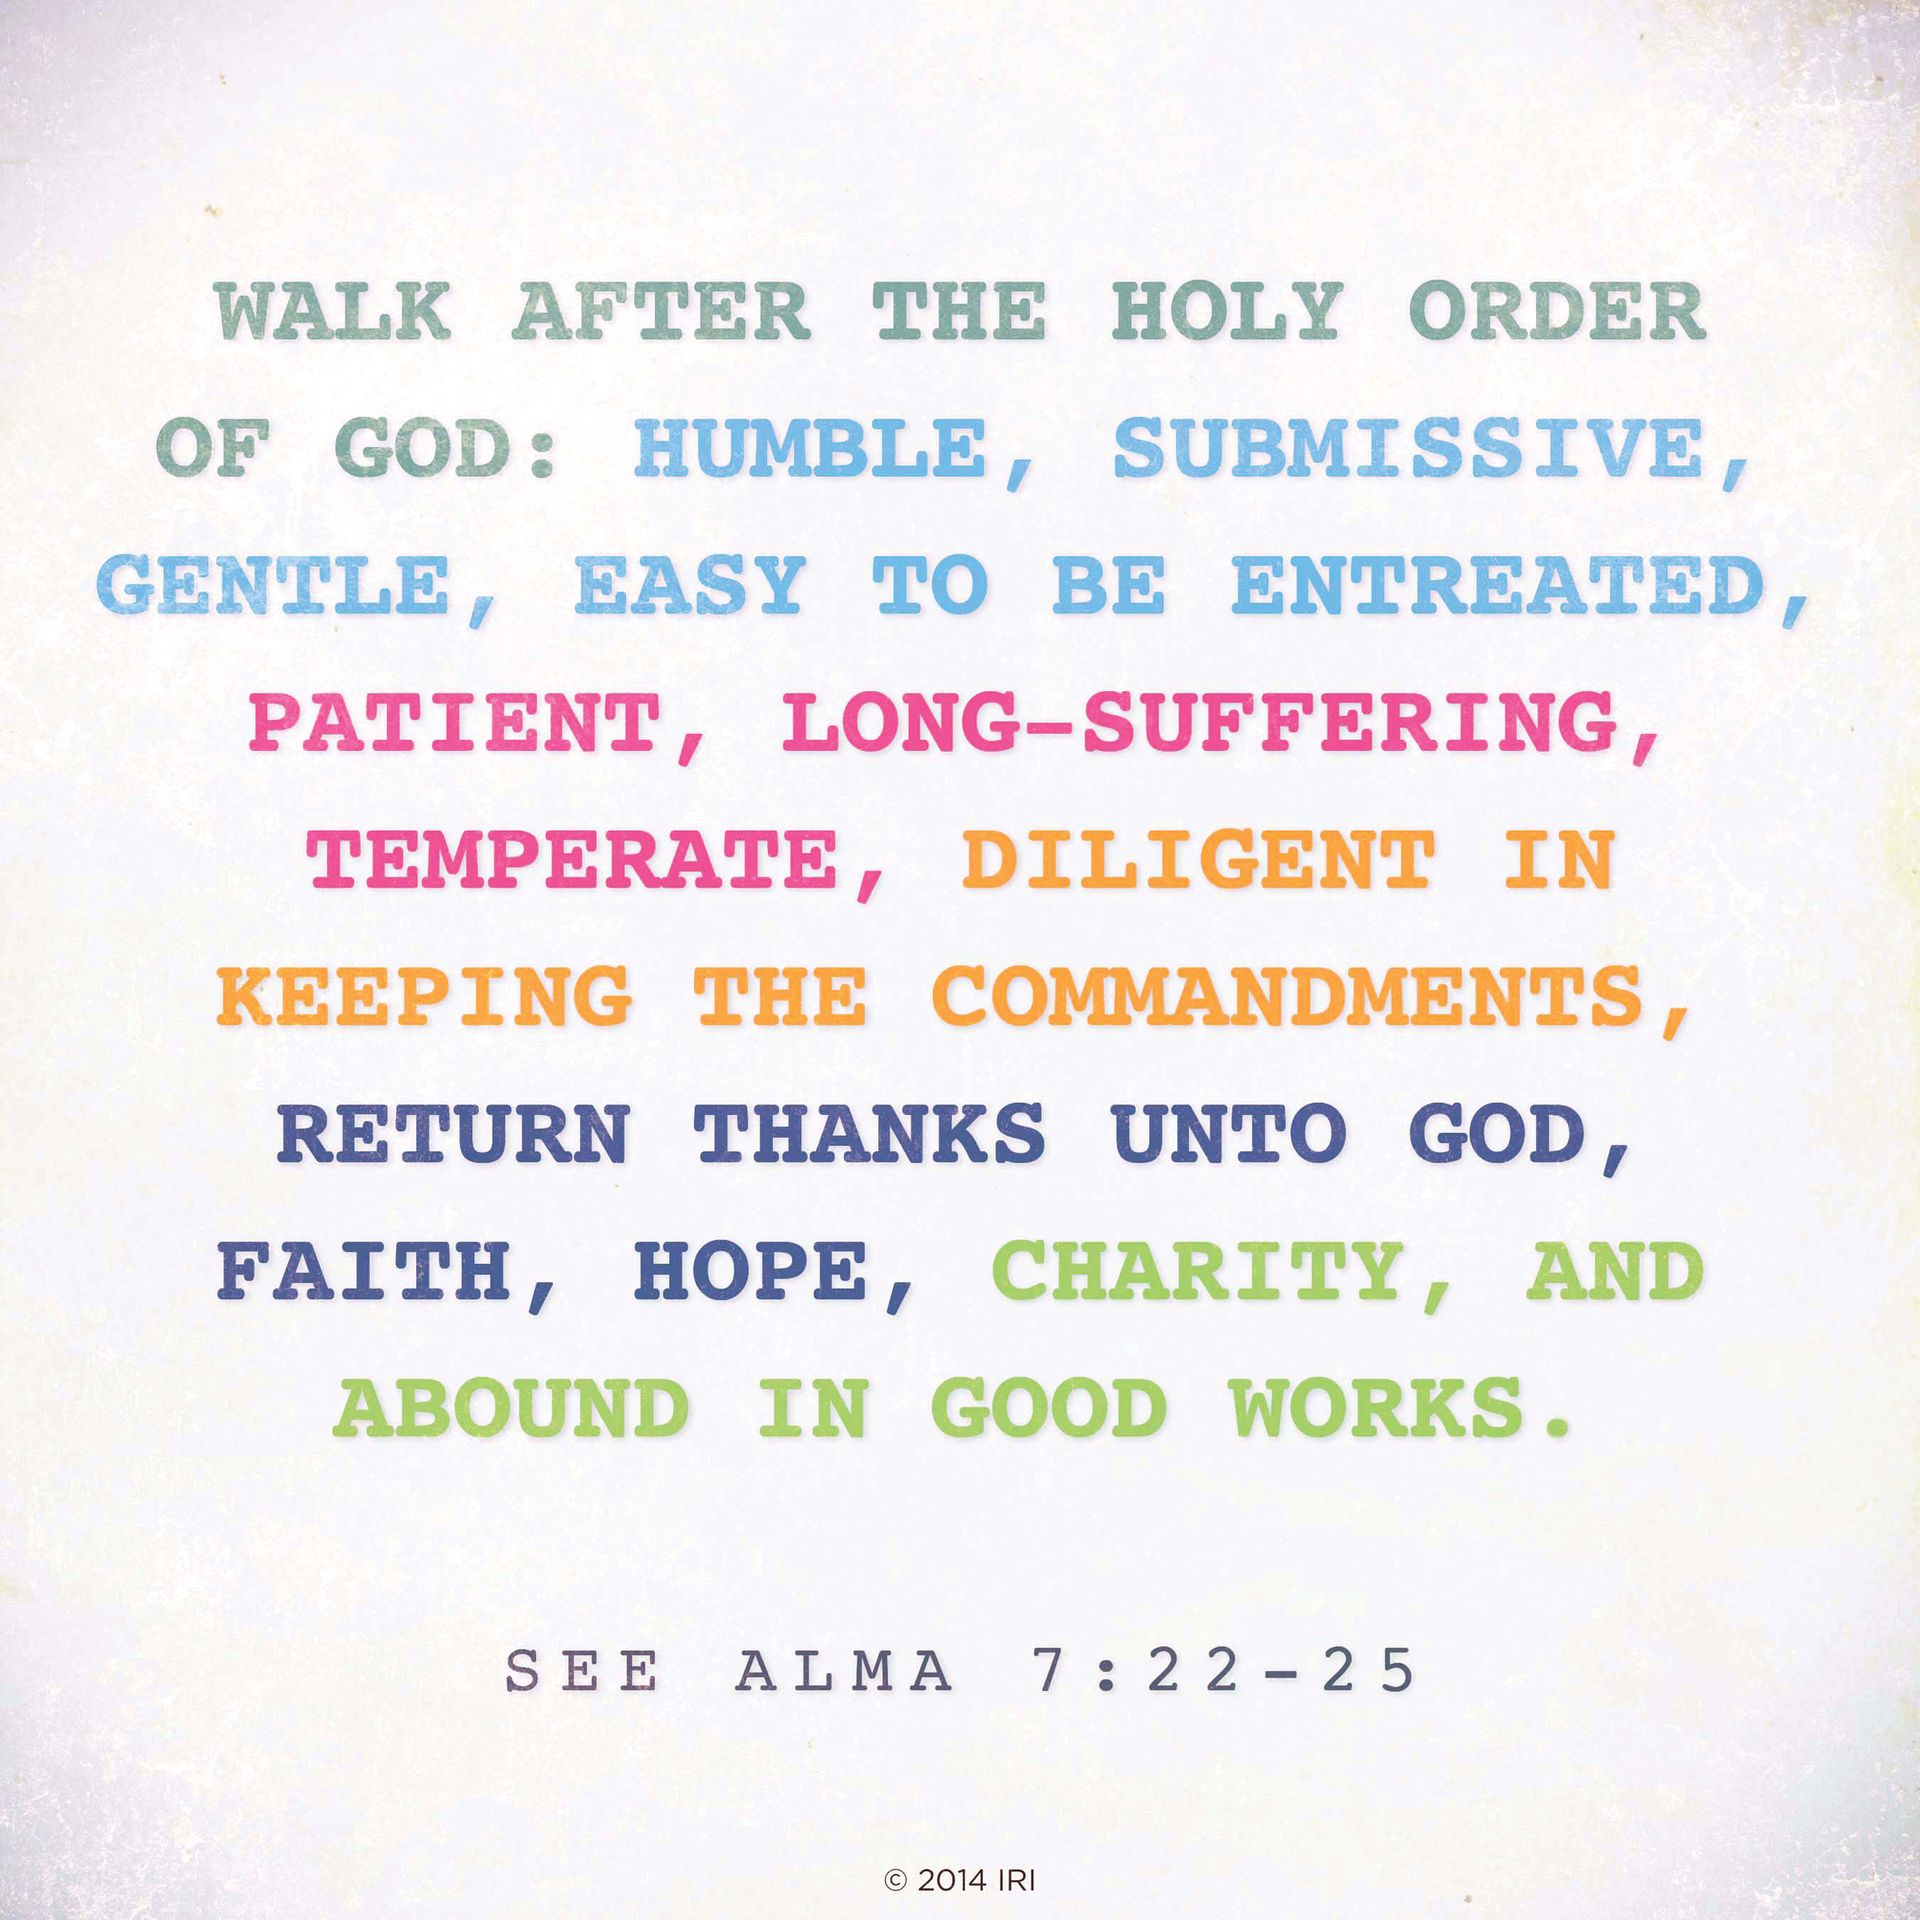 Walk after the holy order of God: humble, submissive, gentle, easy to be entreated, patient, long-suffering, temperate, diligent in keeping the commandments, return thanks unto God, faith, hope, charity, and abound in good works.—See Alma 7:22–25